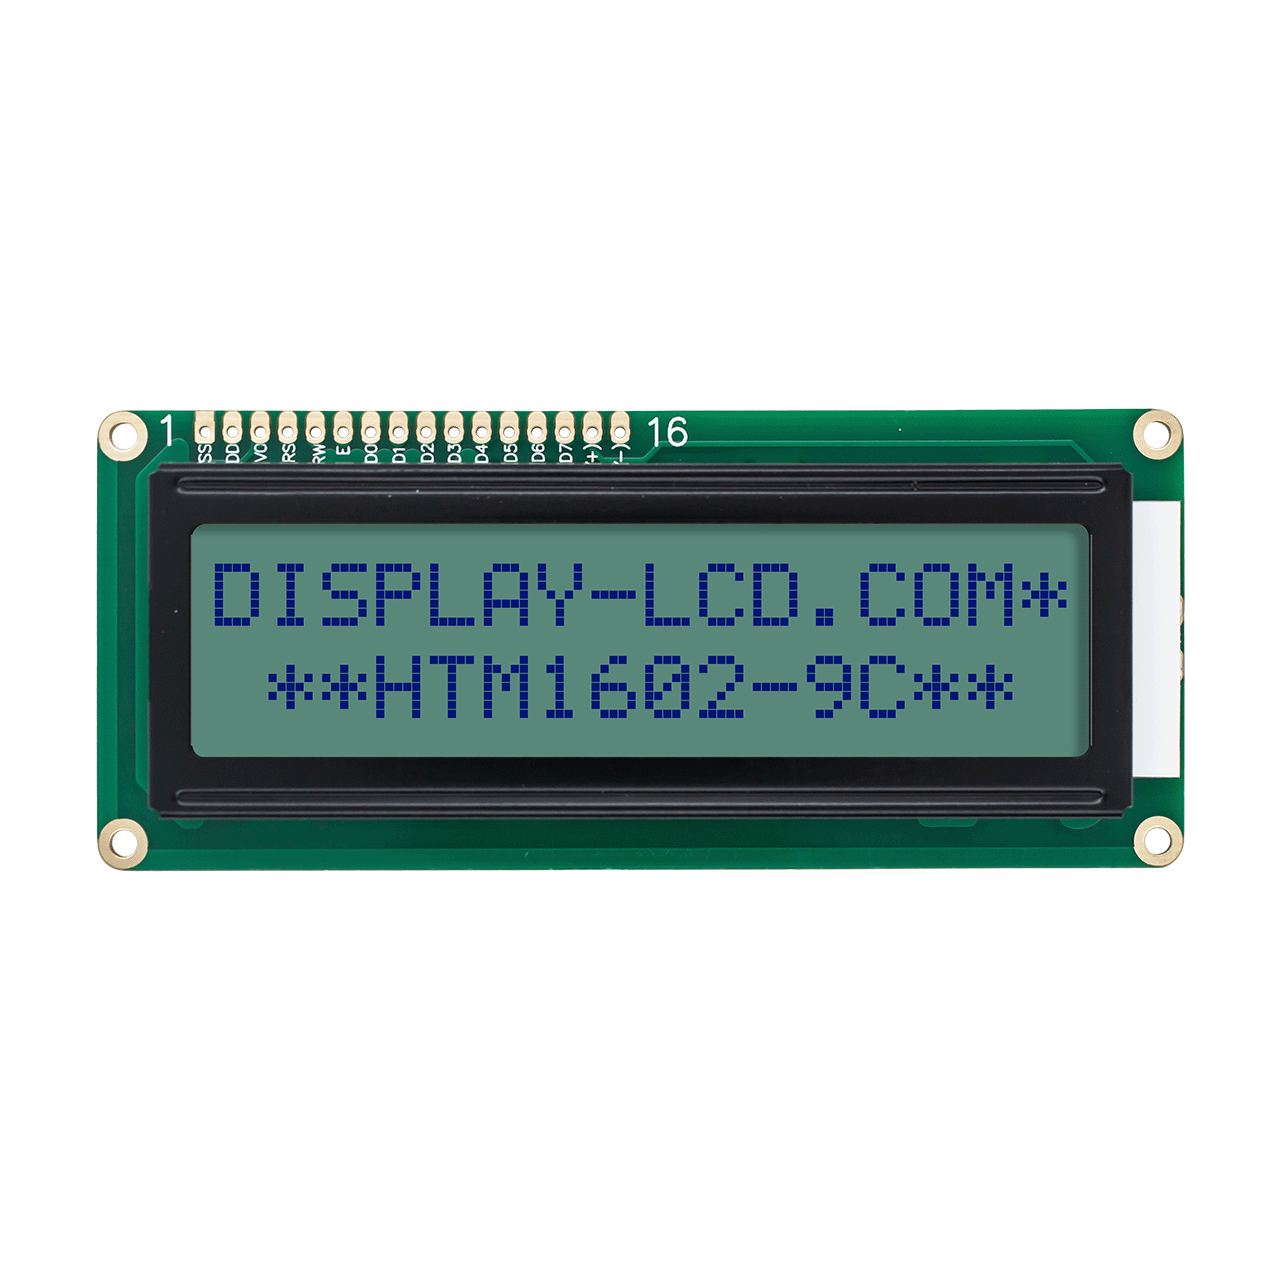 2X16 Character LCD Module Display | STN+ Gray Display with yellow/green Side Backlight-Arduino